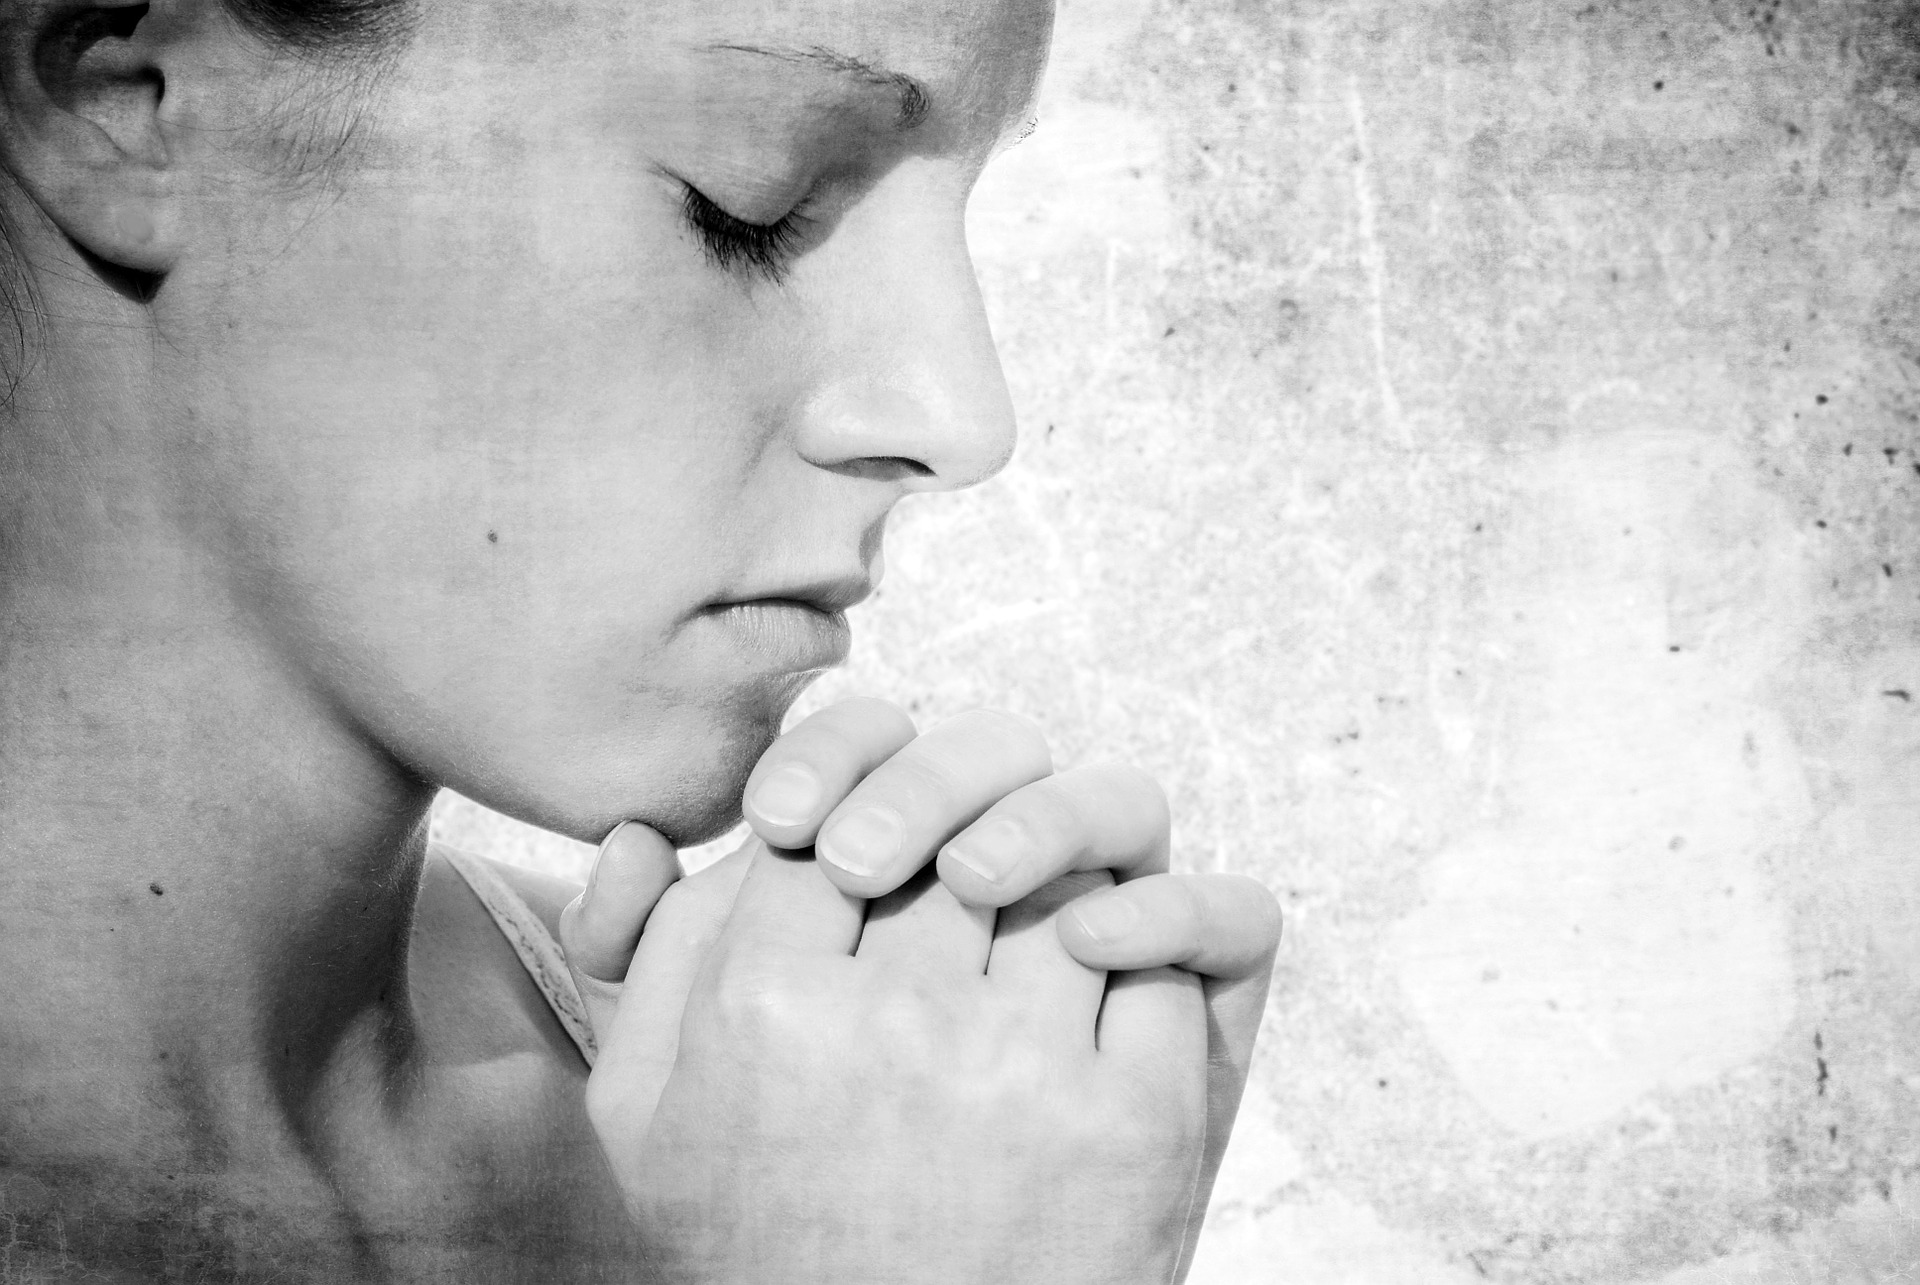 Prayer and dealing with conflict